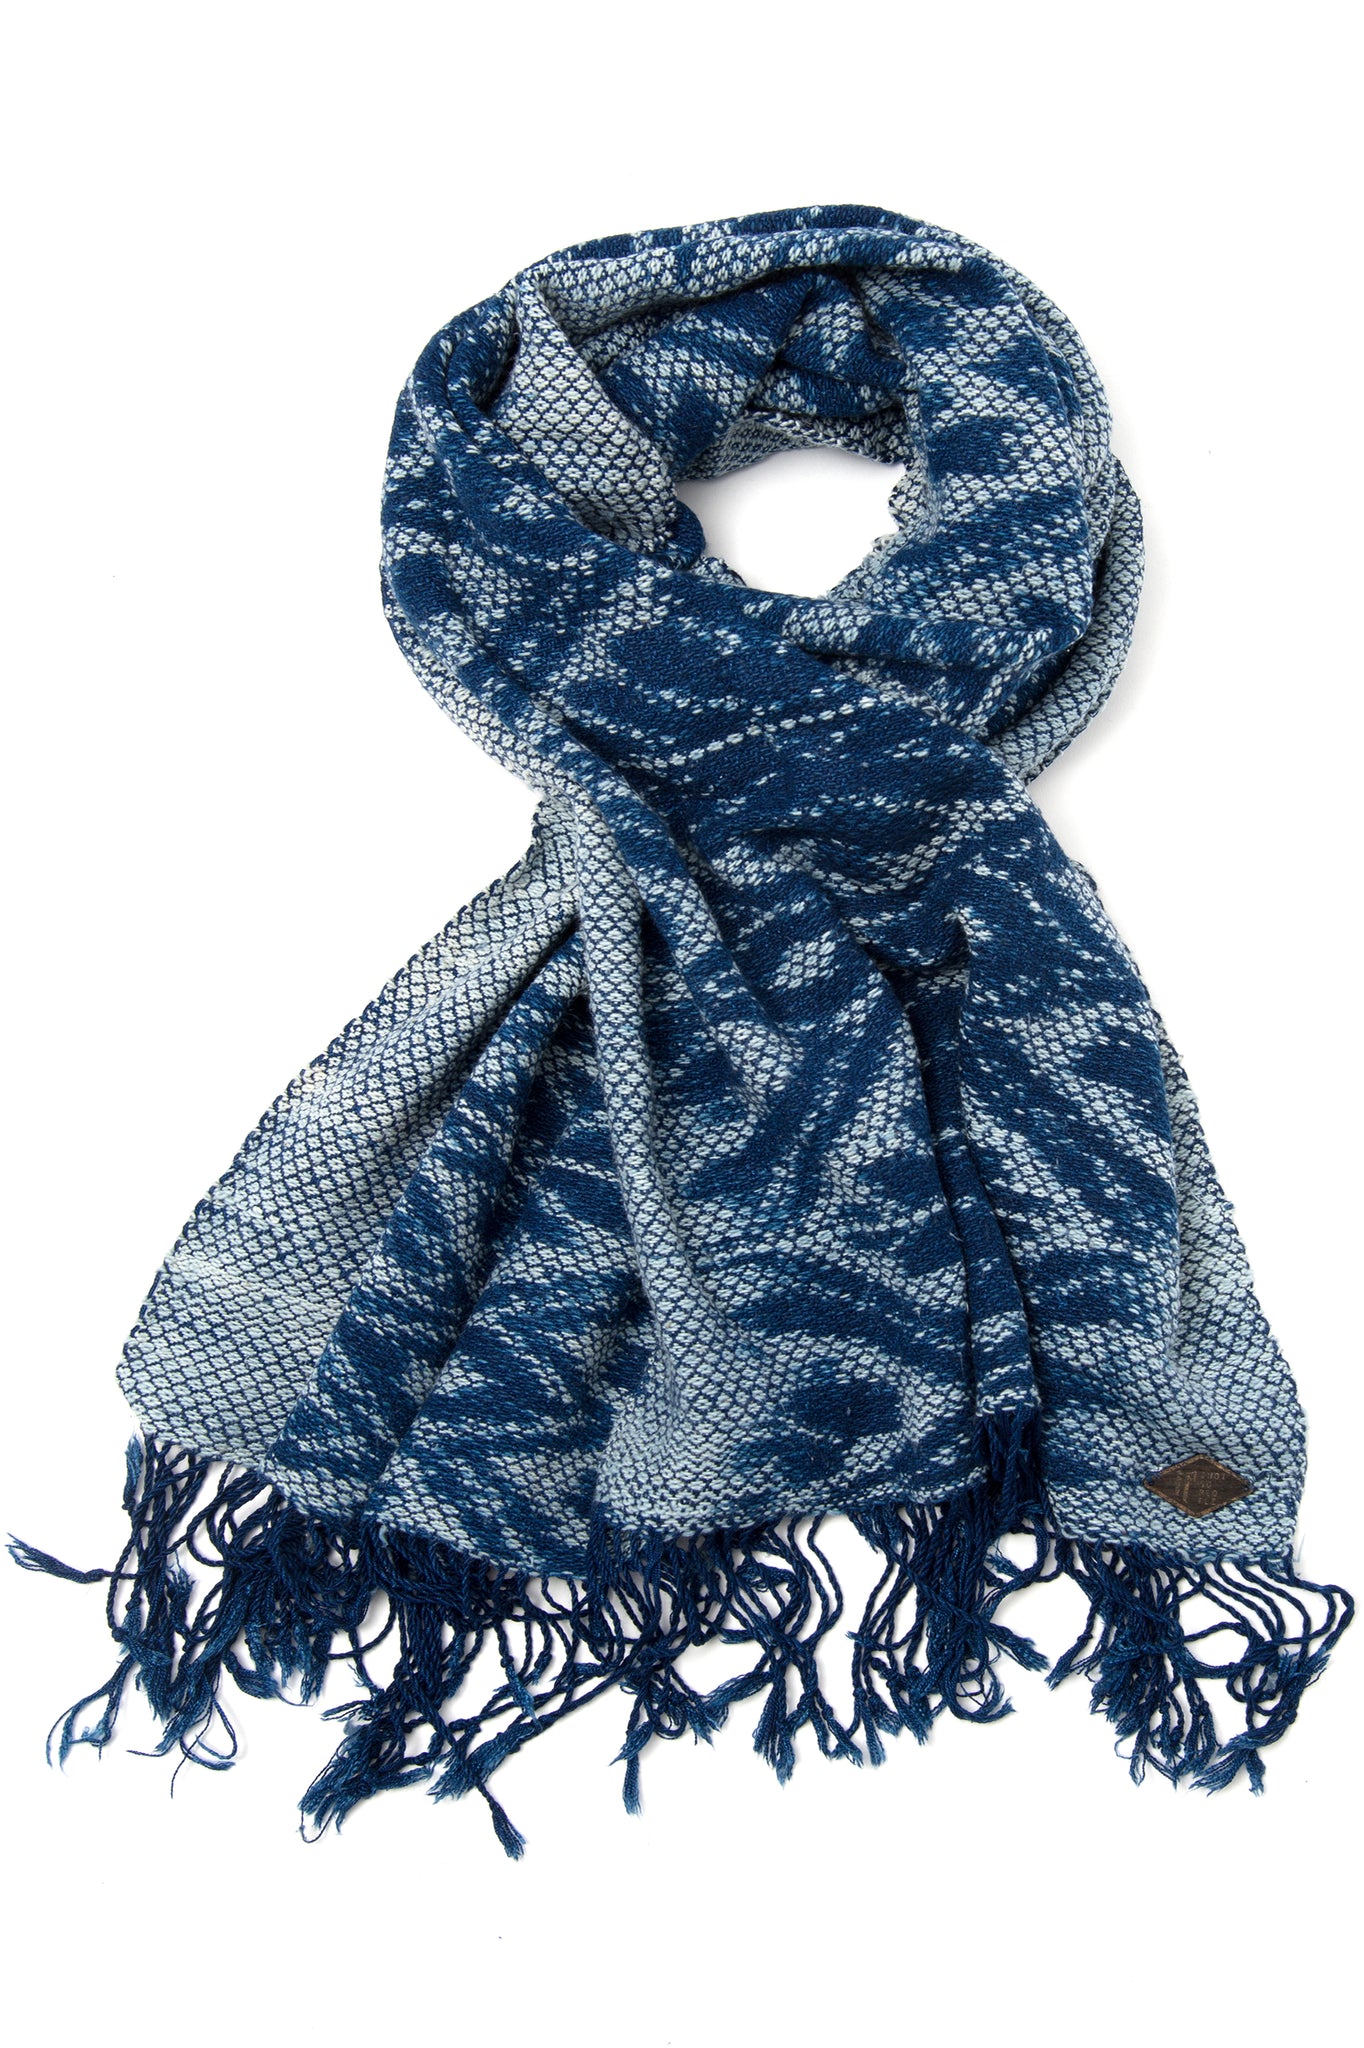 FAME SCARF - hand loomed ikat